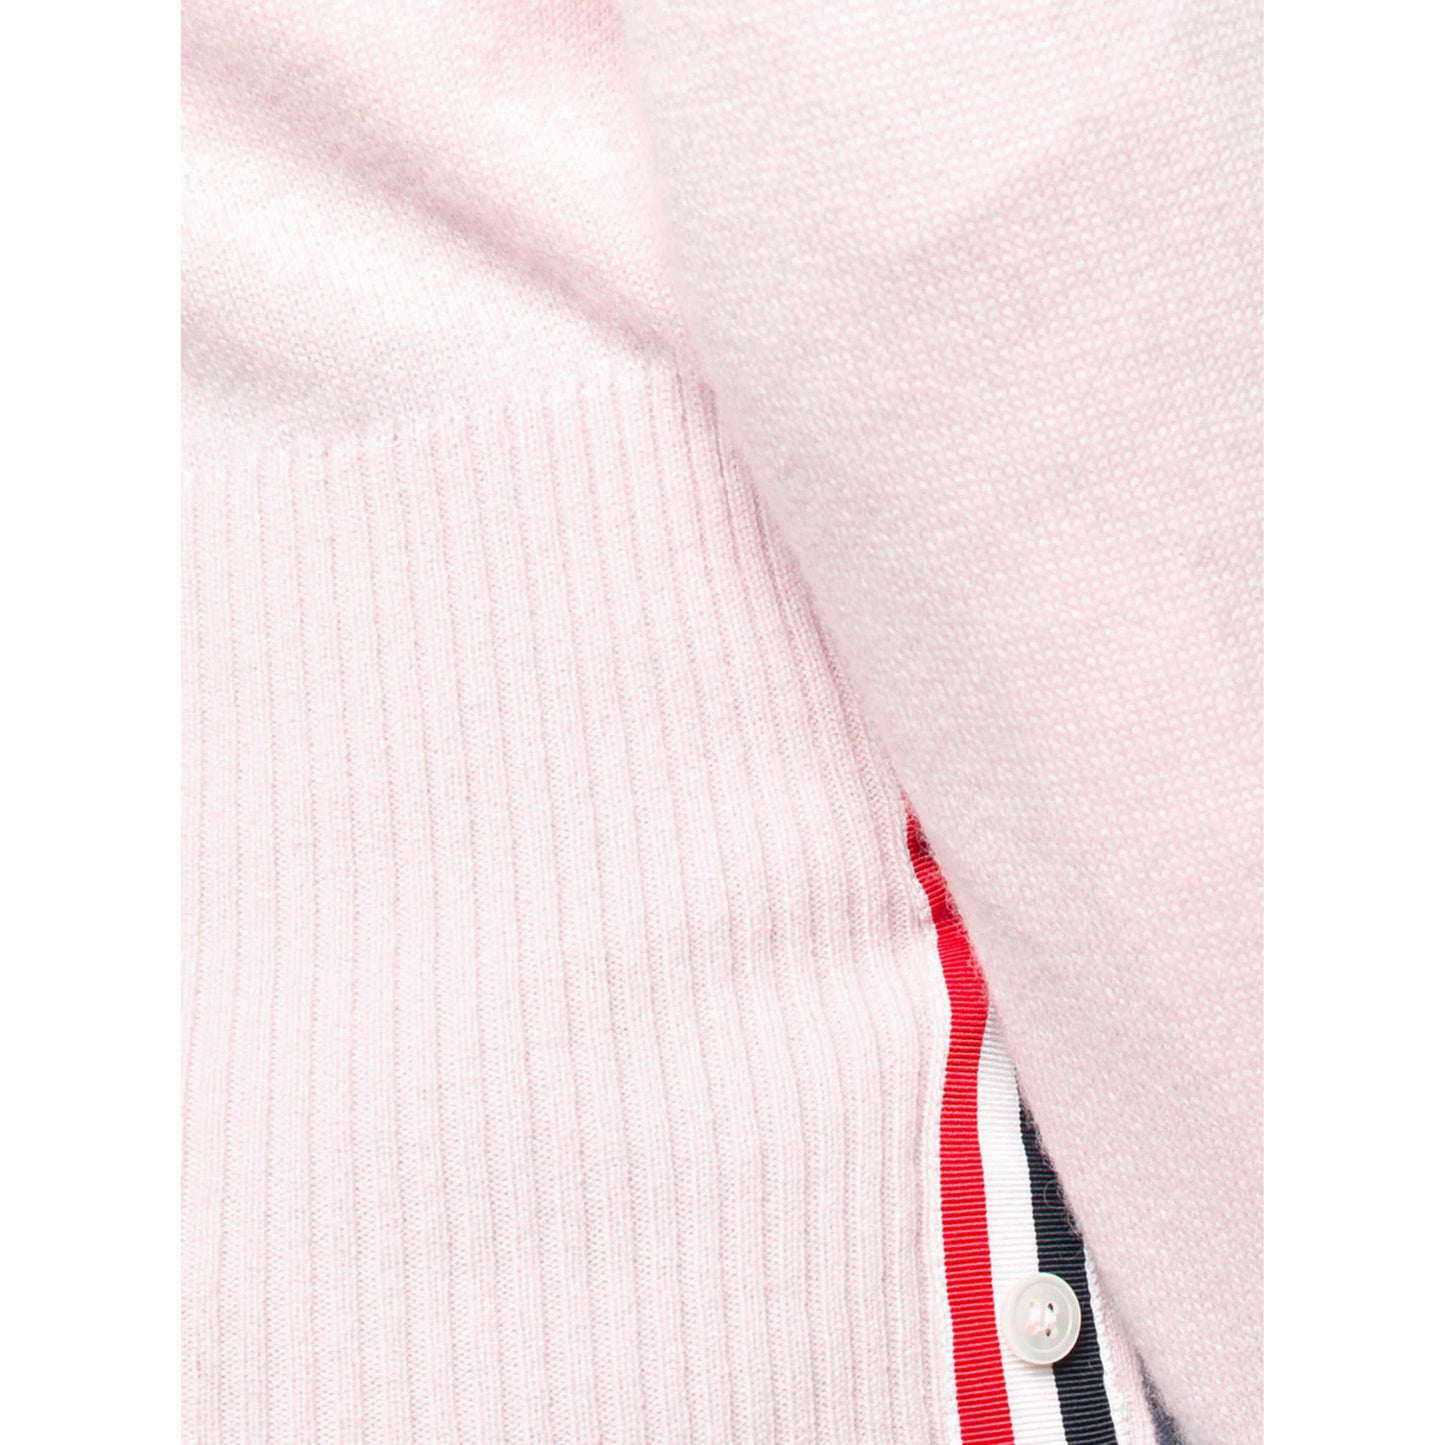 Thom Browne Pink Cashmere Cardigan, size 42 (fits like size Small)